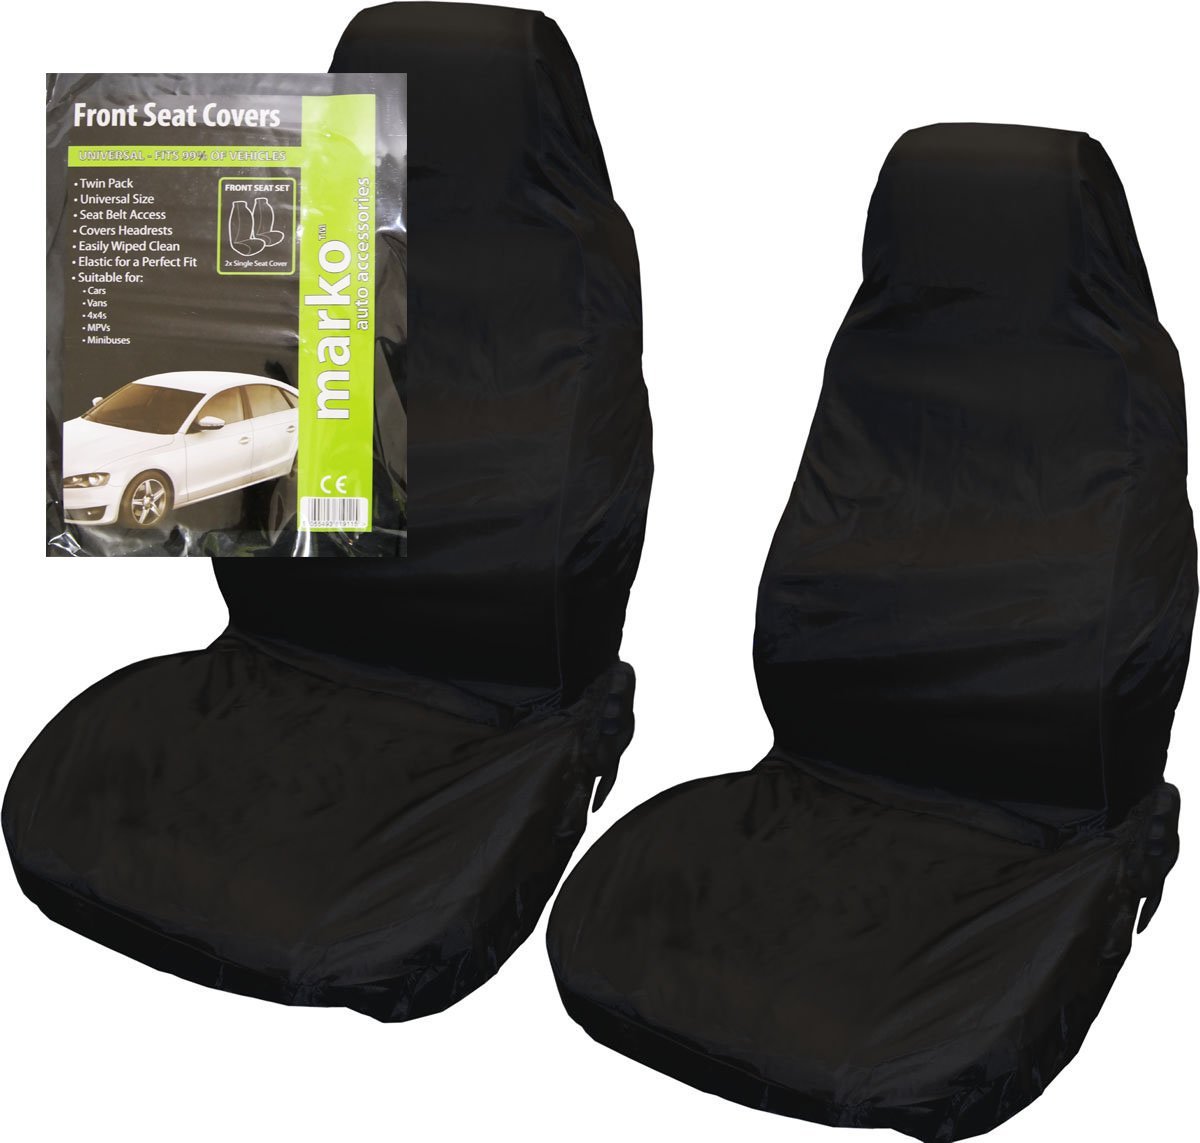 Review of Town and Country 3D Stretch Front Seat Cover